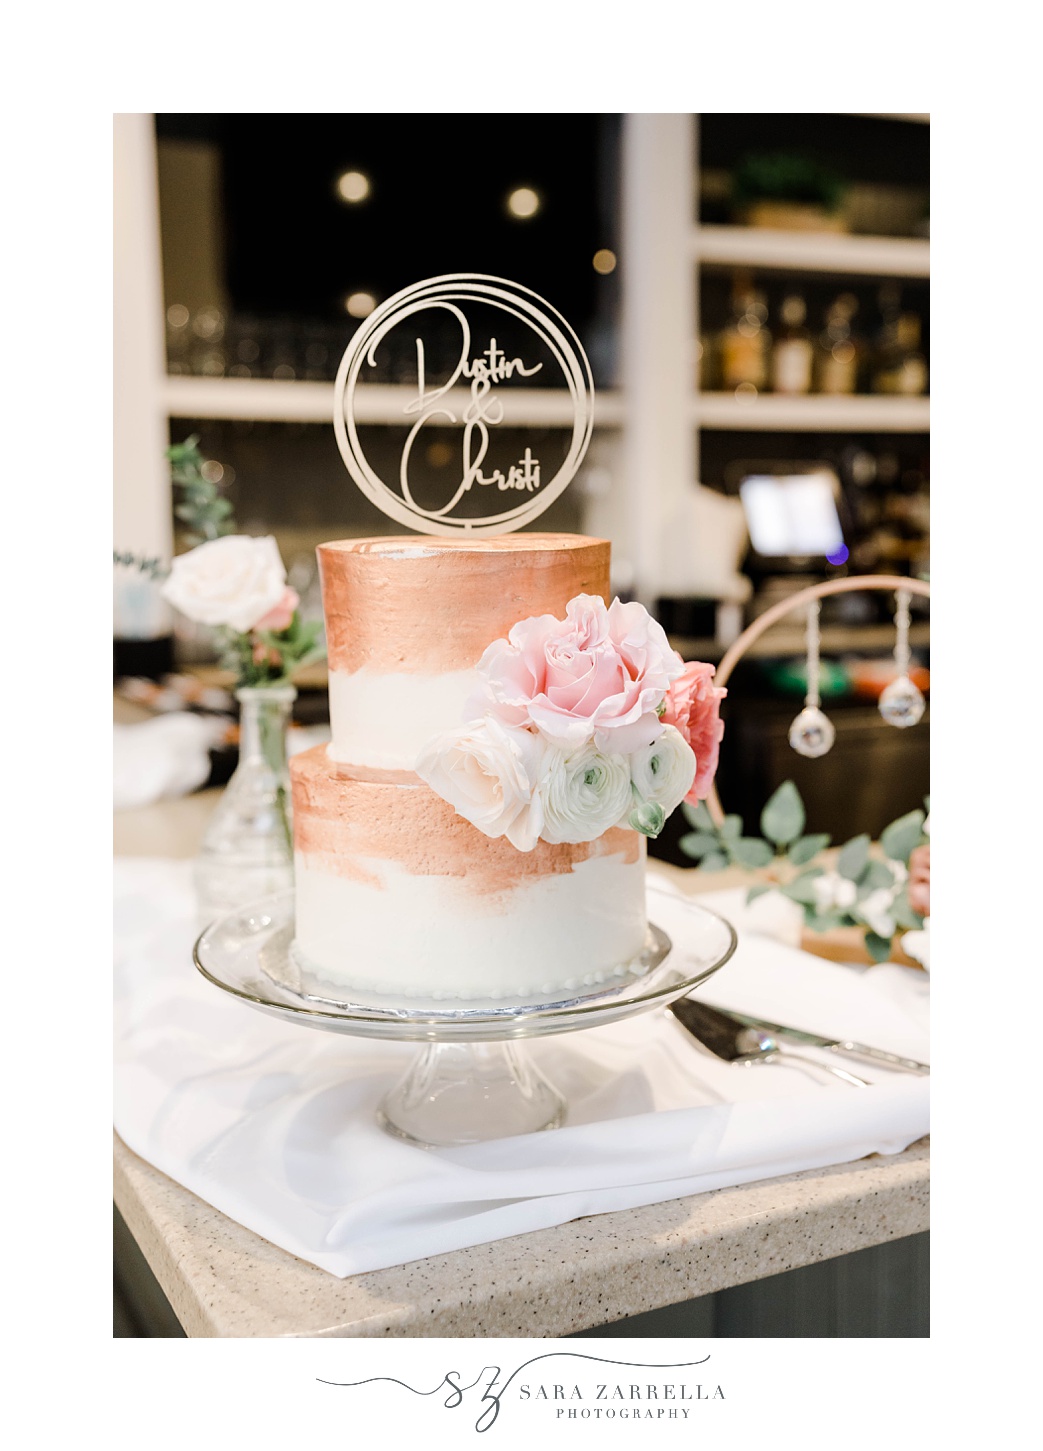 tiered wedding cake with copper icing